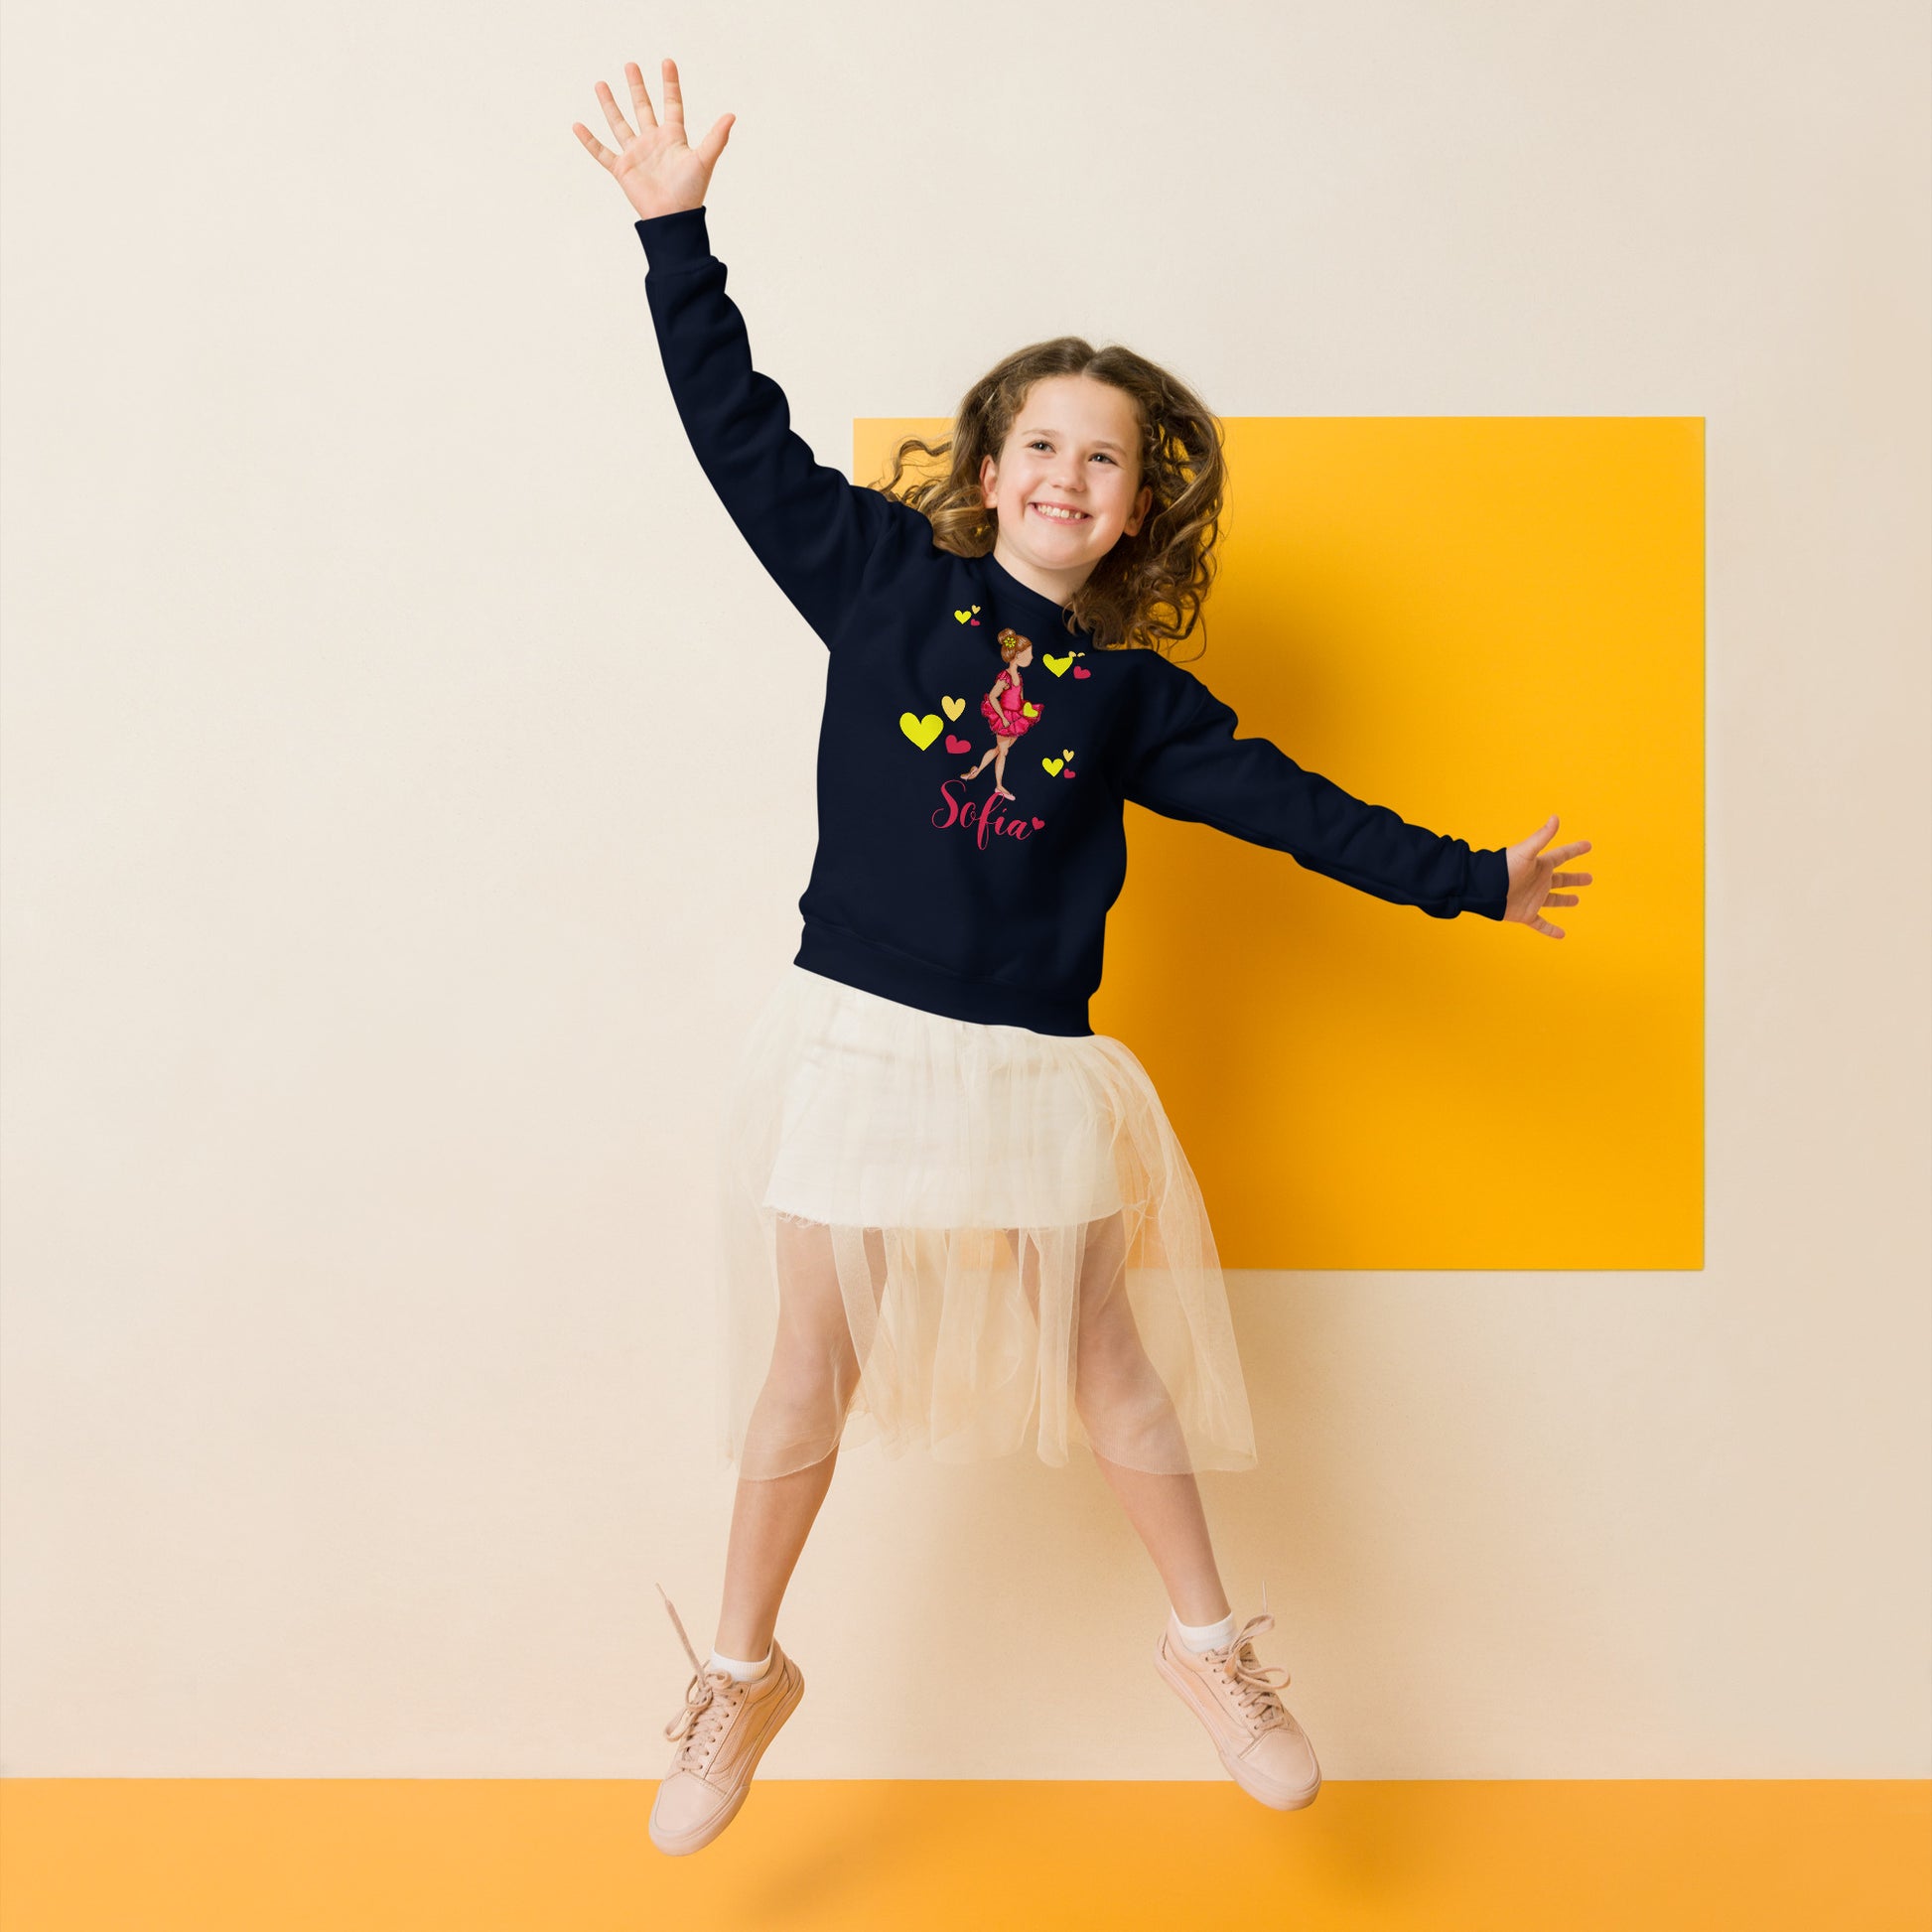 a young girl is jumping in the air